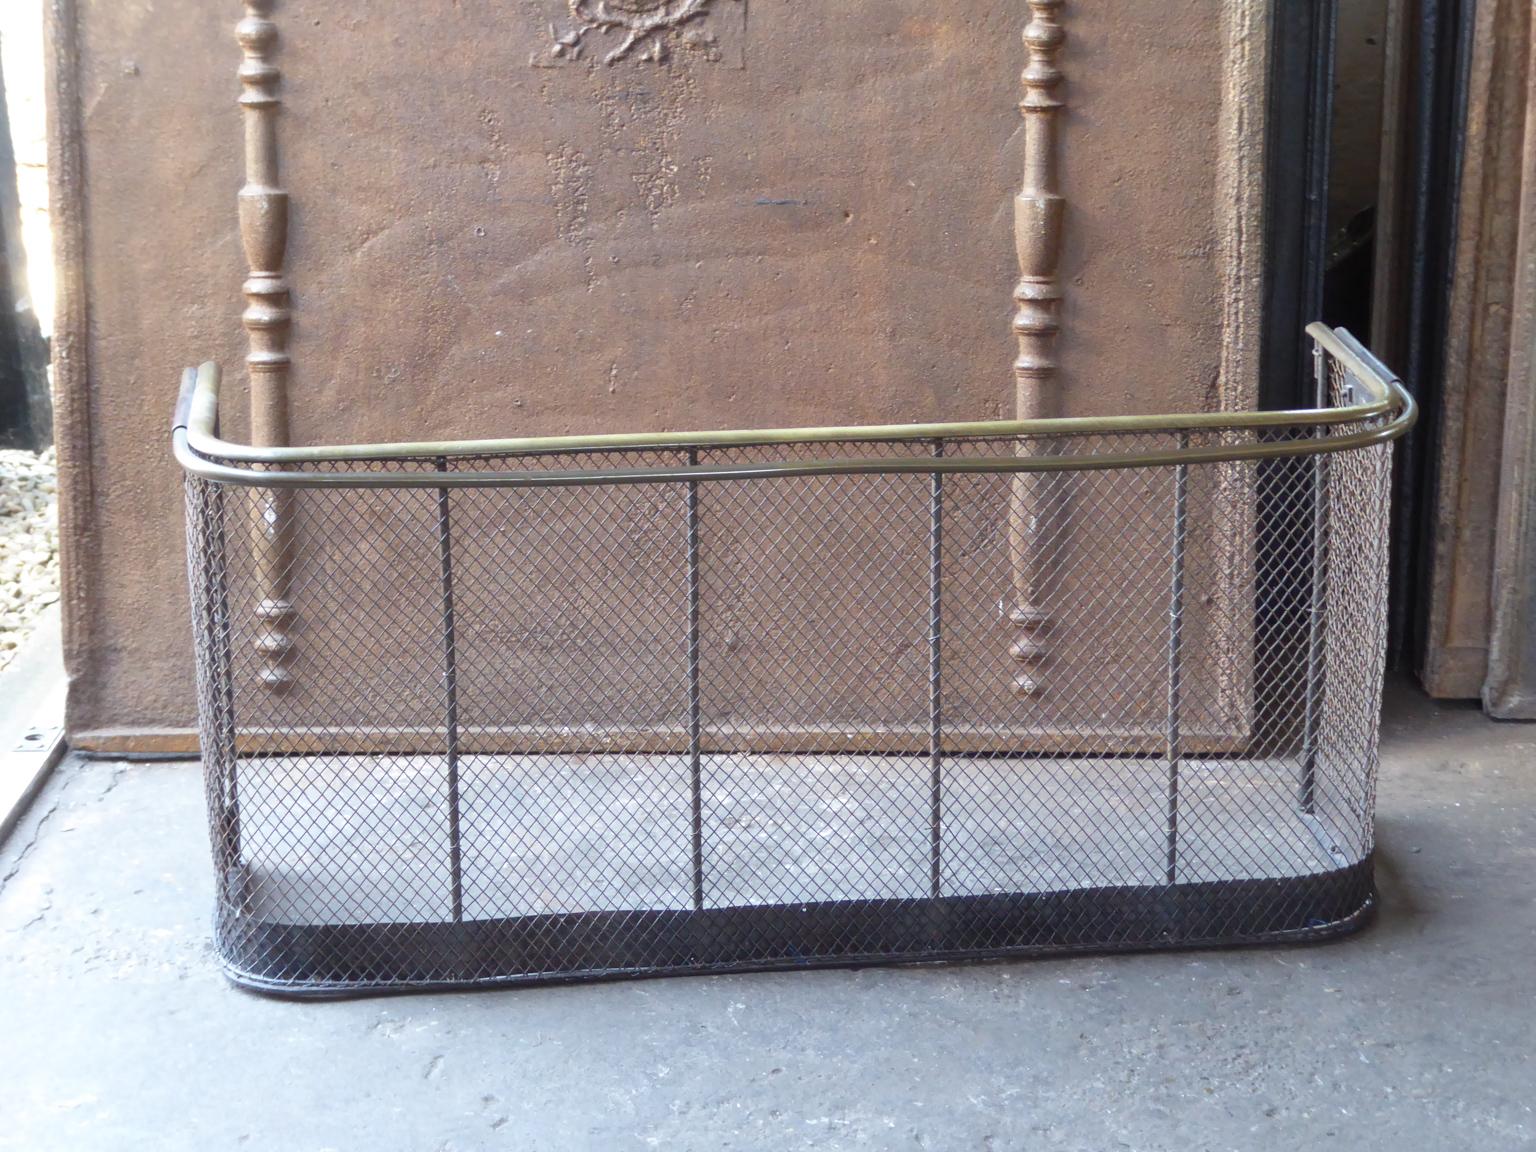 19th century English Victorian fireguard, fireplace guard made of brass, iron and iron mesh. The fire guard is in a good condition and is fully functional.







   